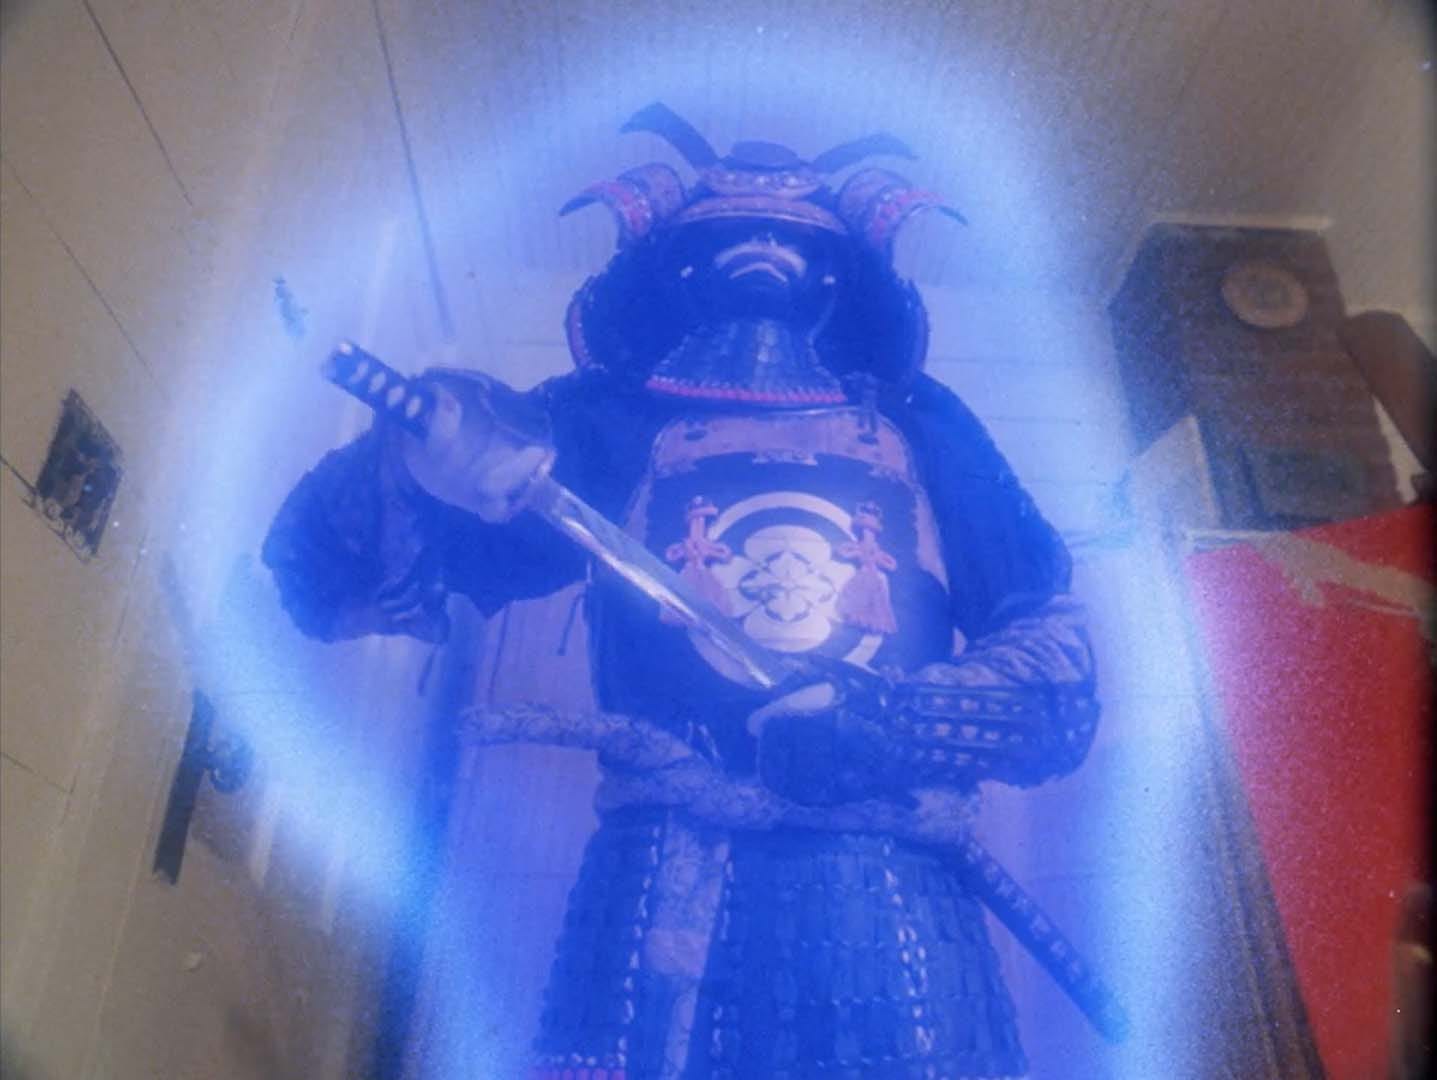 A samurai ghost stalks Wisconsin in the 1983 Christmas horror movie Blood Beat